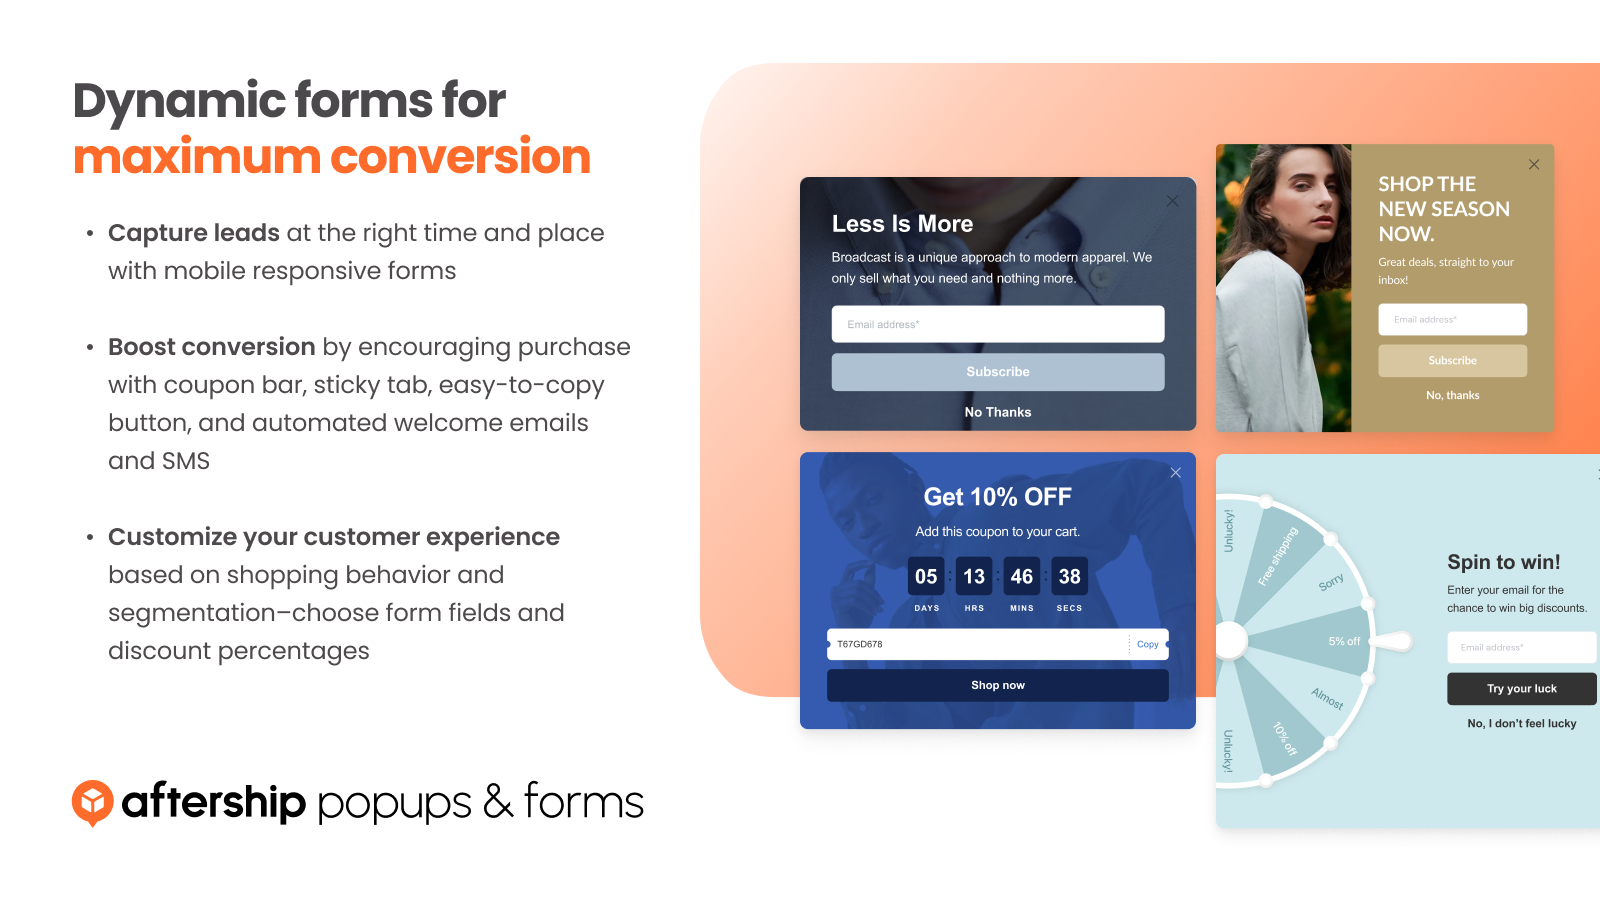 Dynamic forms for maximum conversion